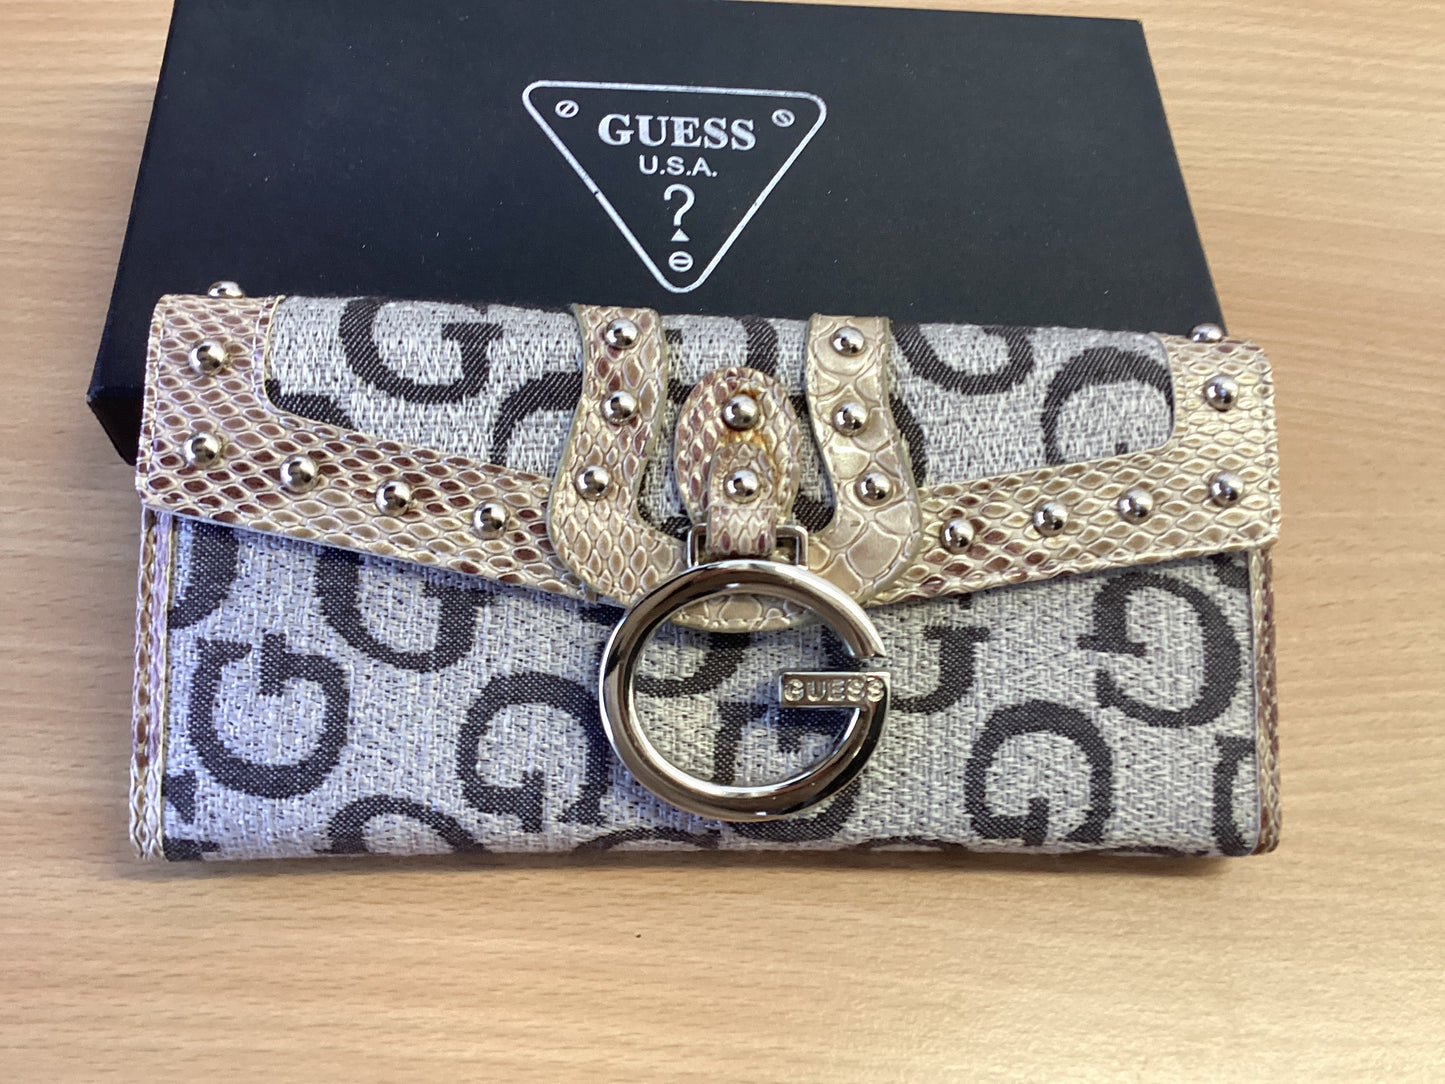 Guess women’s wallet, boxed